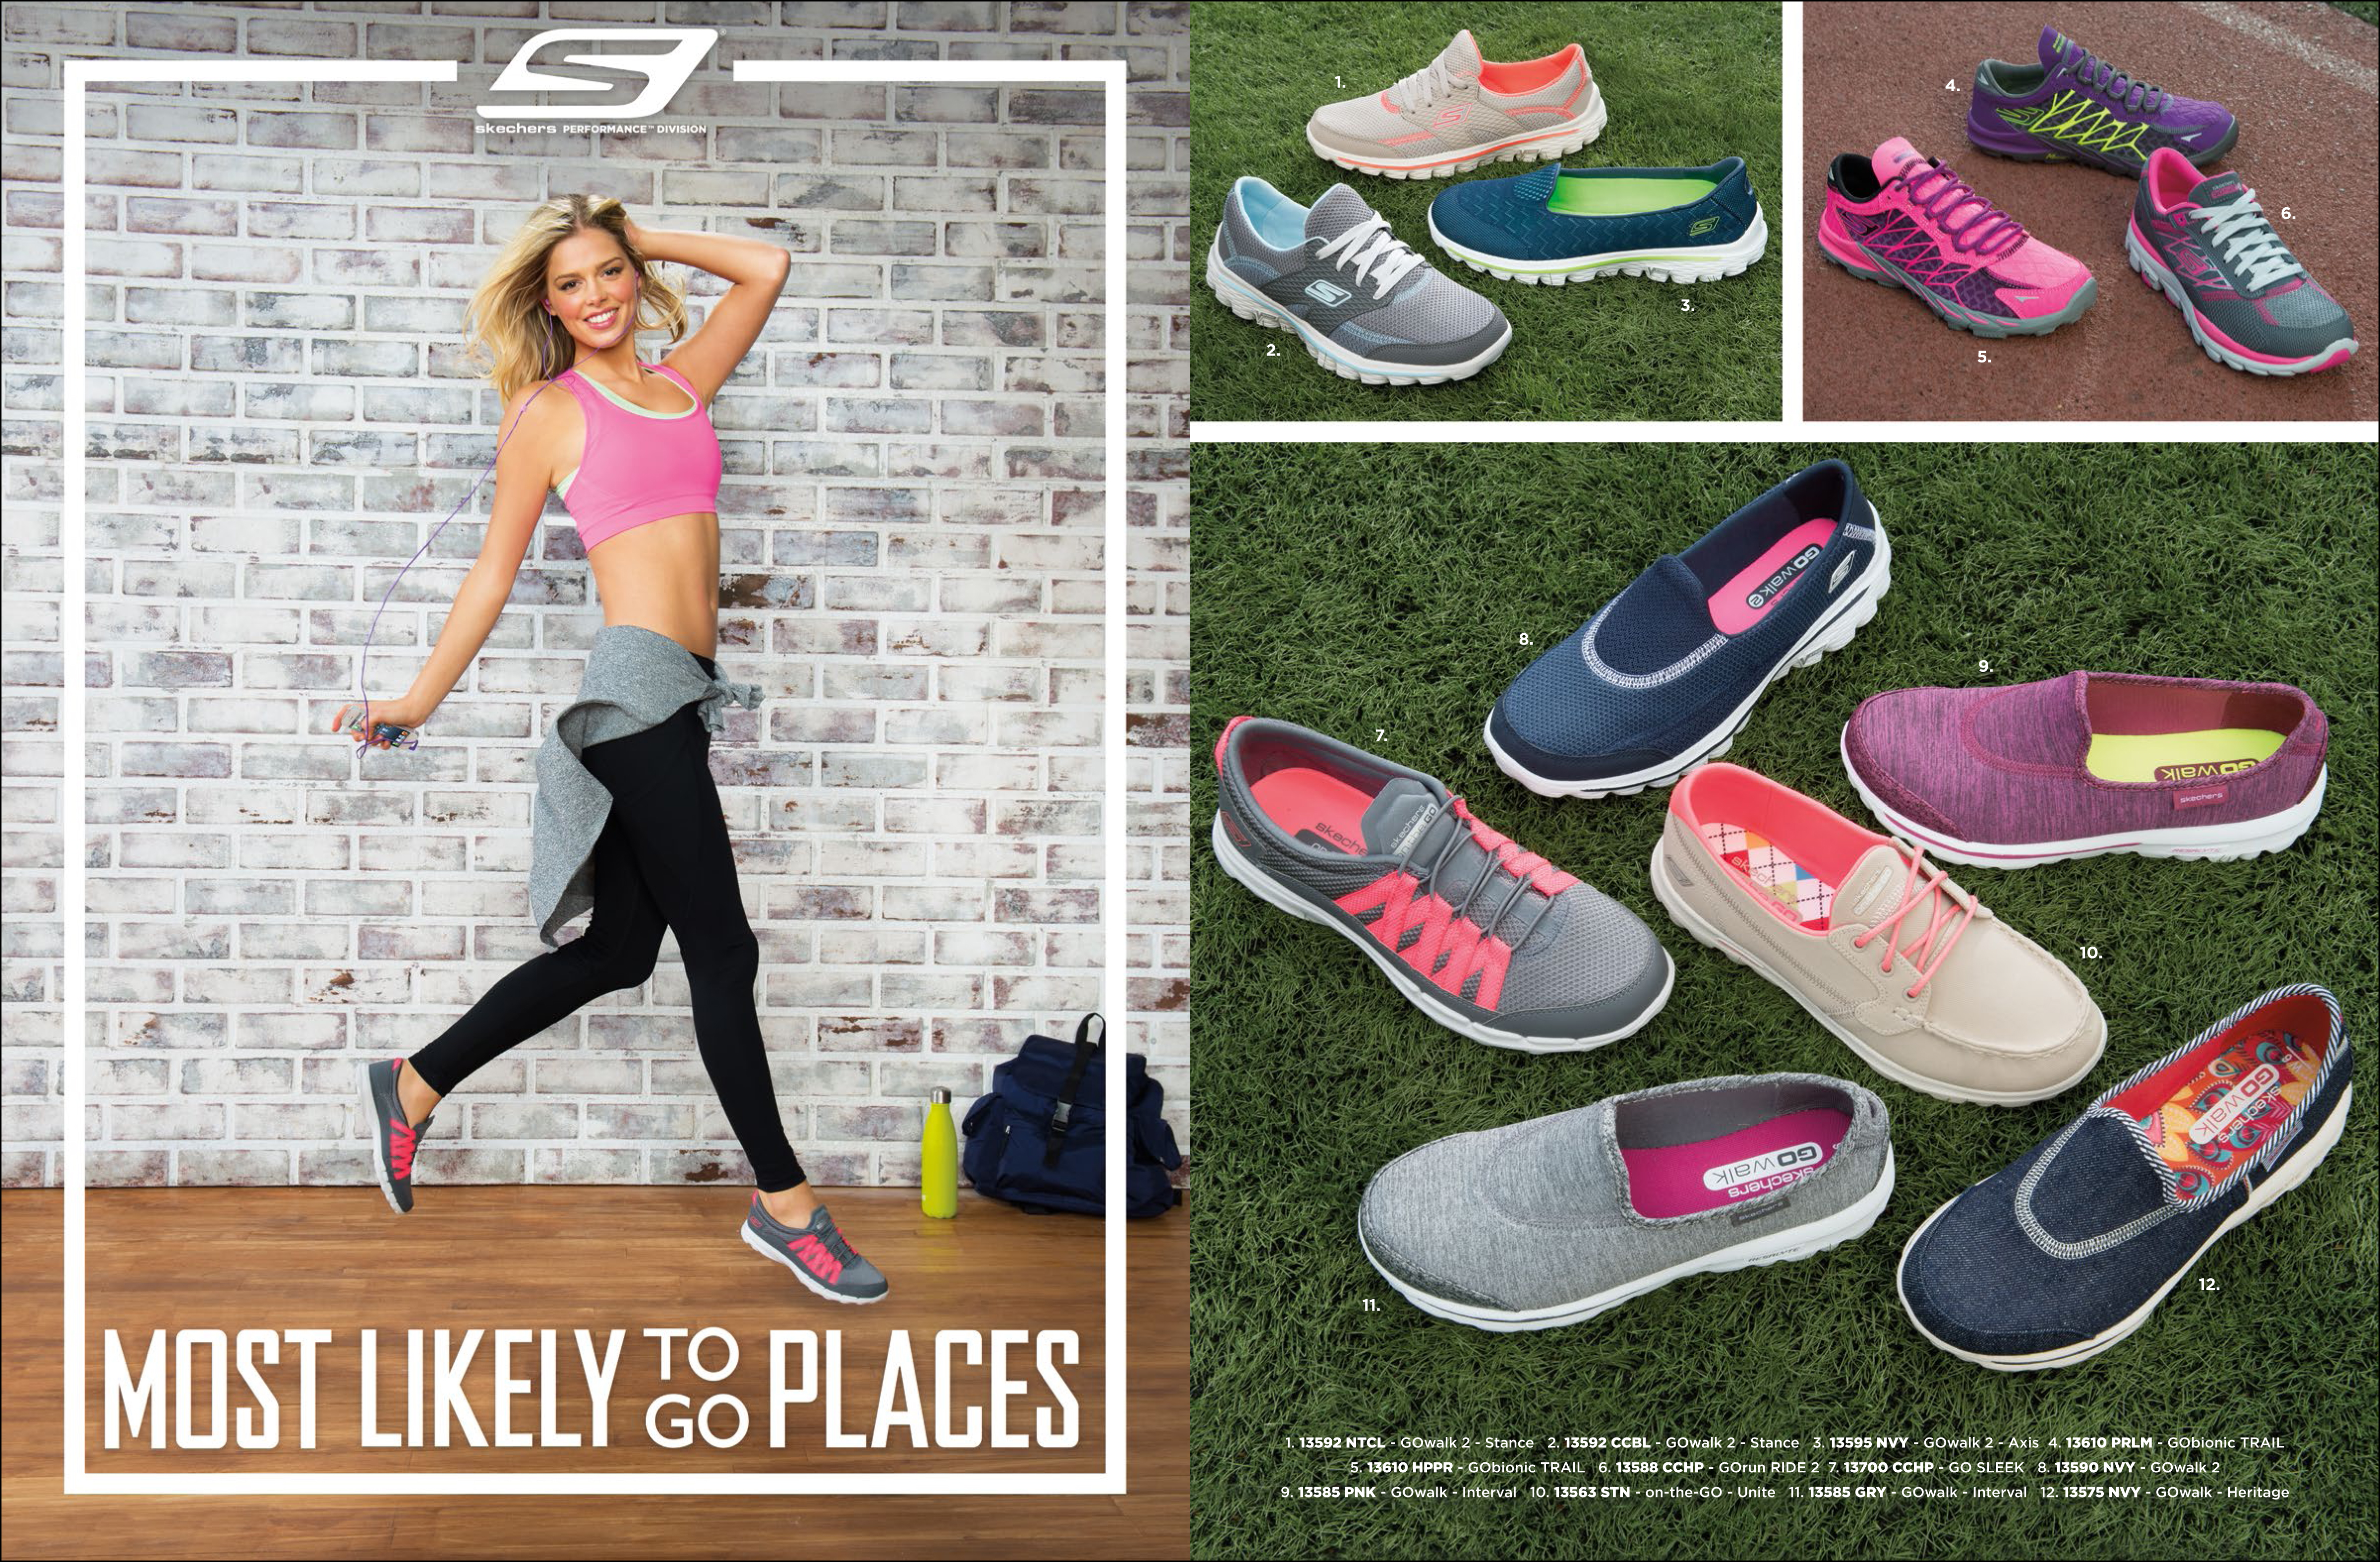 skechers catalogue 2018 off 76 